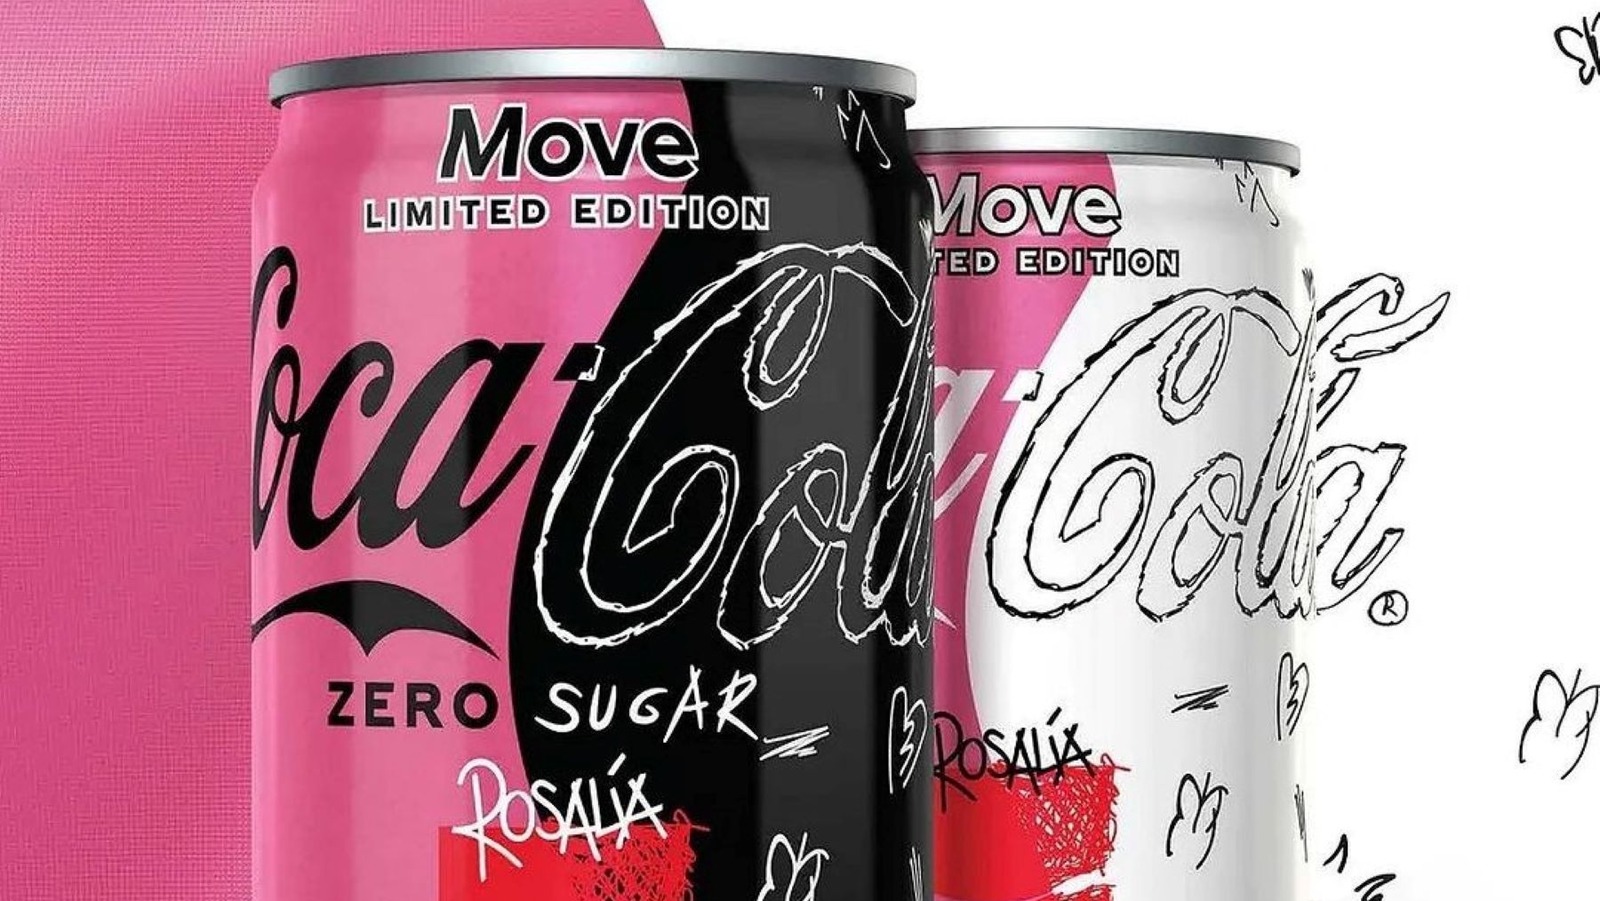 Coca Cola's New Limited Edition Flavor Is 'Transformation.' Here's What